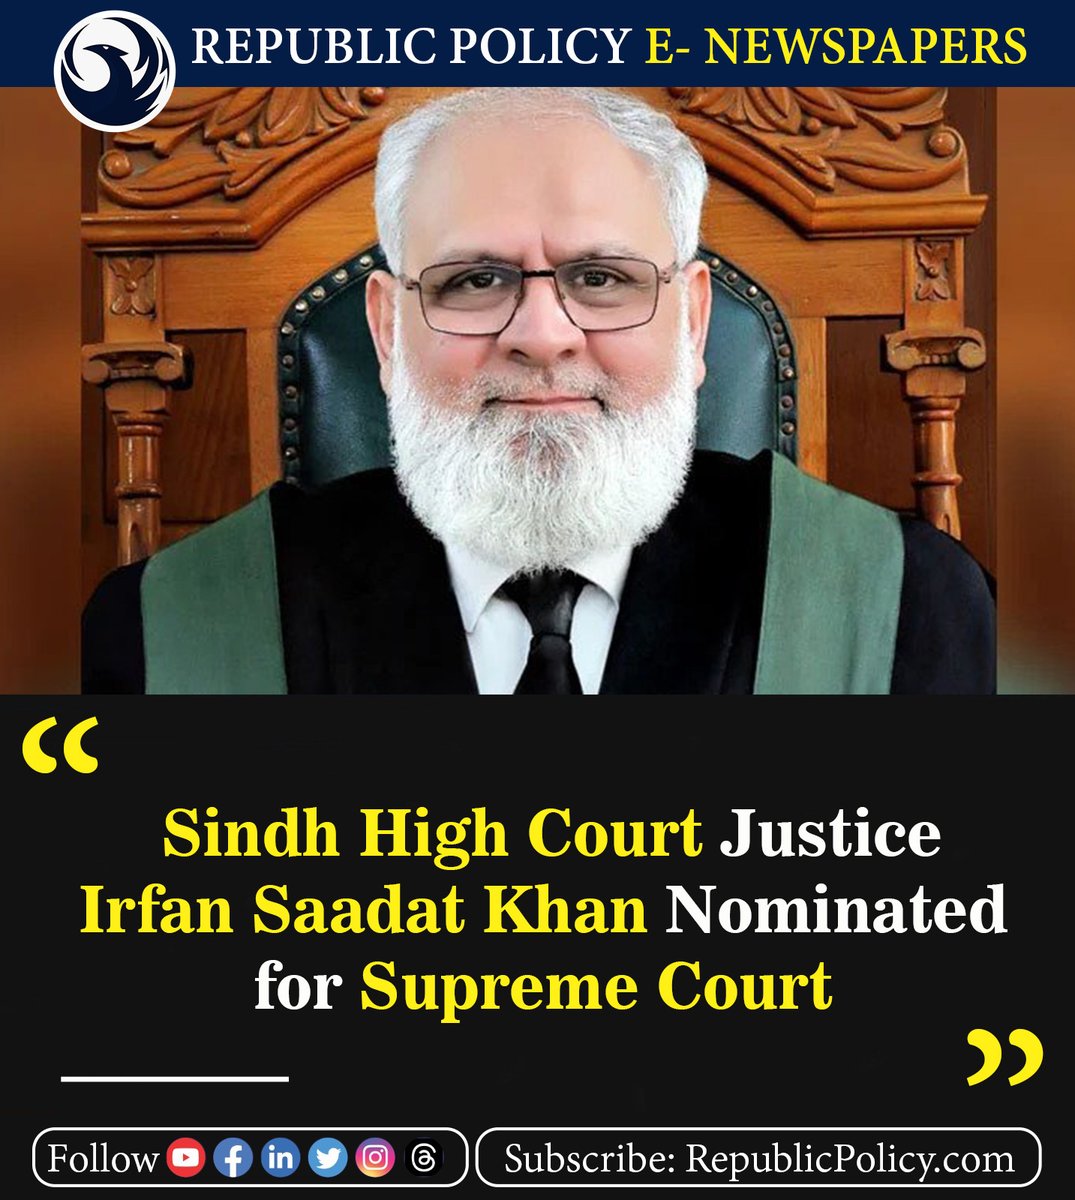 ISLAMABAD: The Judicial Commission of Pakistan (JCP) unanimously granted its approval on Friday for the elevation of Irfan Saadat Khan.

Read more: republicpolicy.com/sindh-high-cou…

#SupremeCourt #JudicialCommission #Pakistan #SindhHighCourt #Justice #News